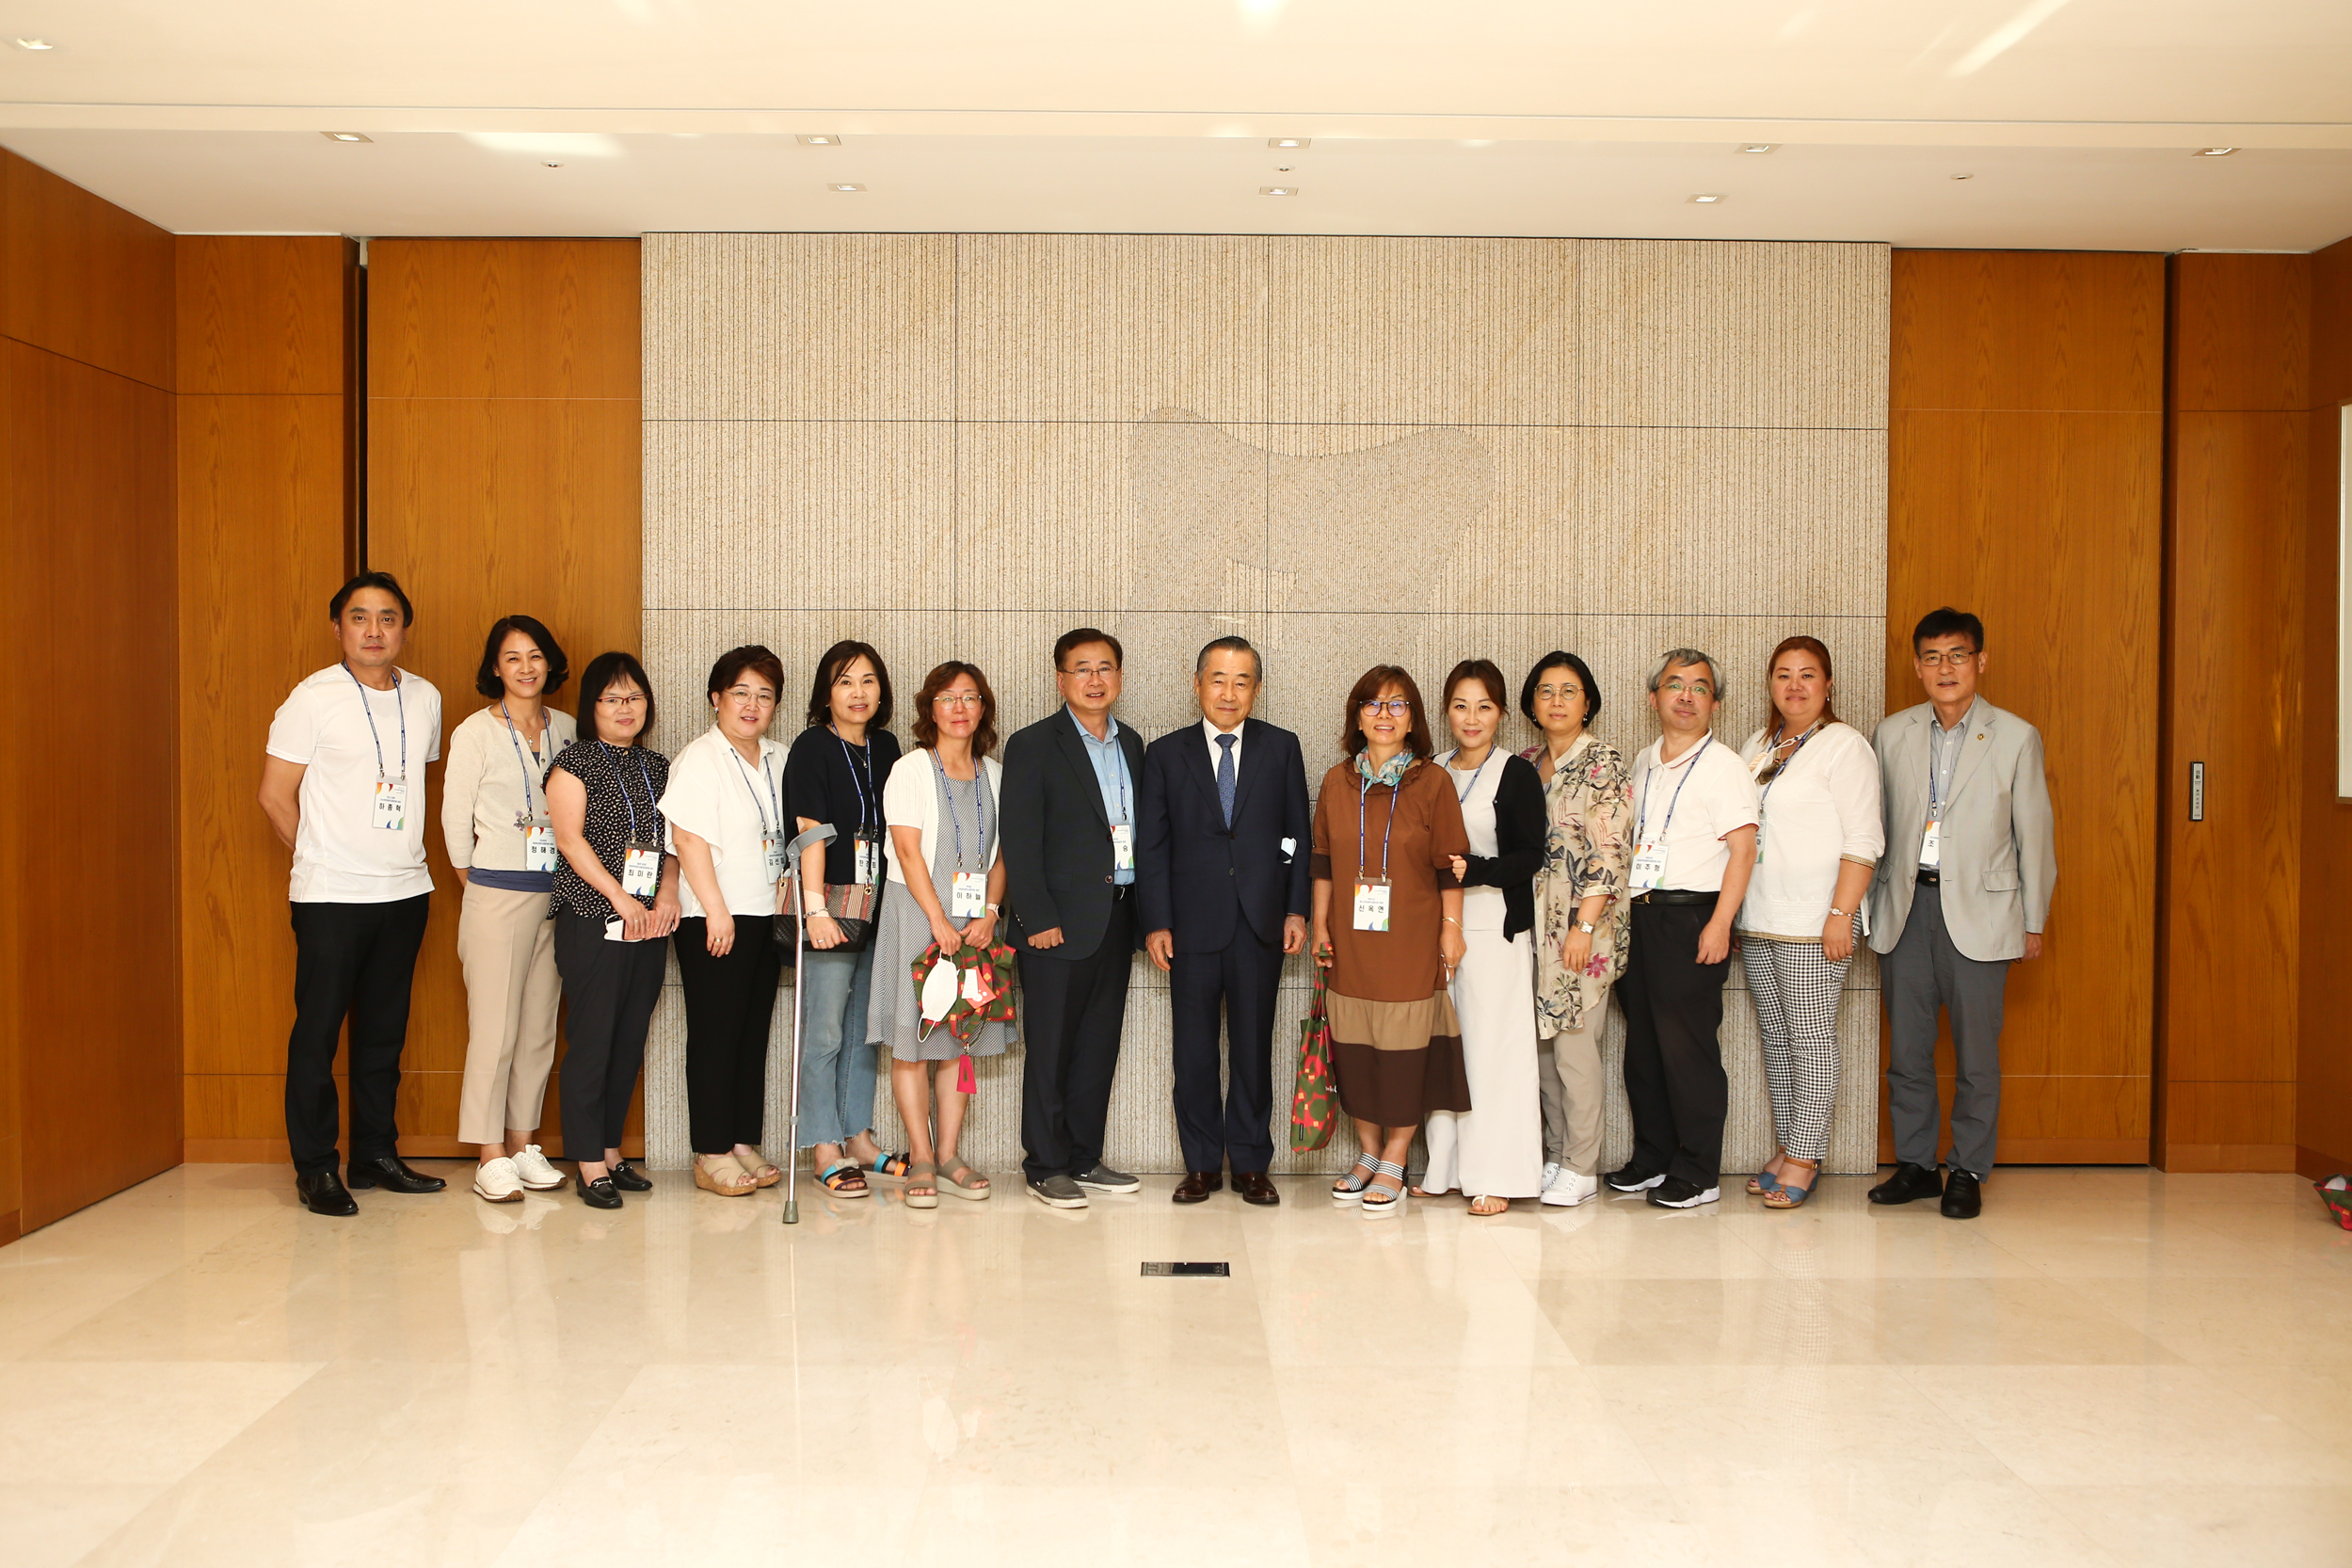 Group photograph during the tour of Ice Cream Media (digital educational content provider) and meeting with Chairman Ki-seok Park